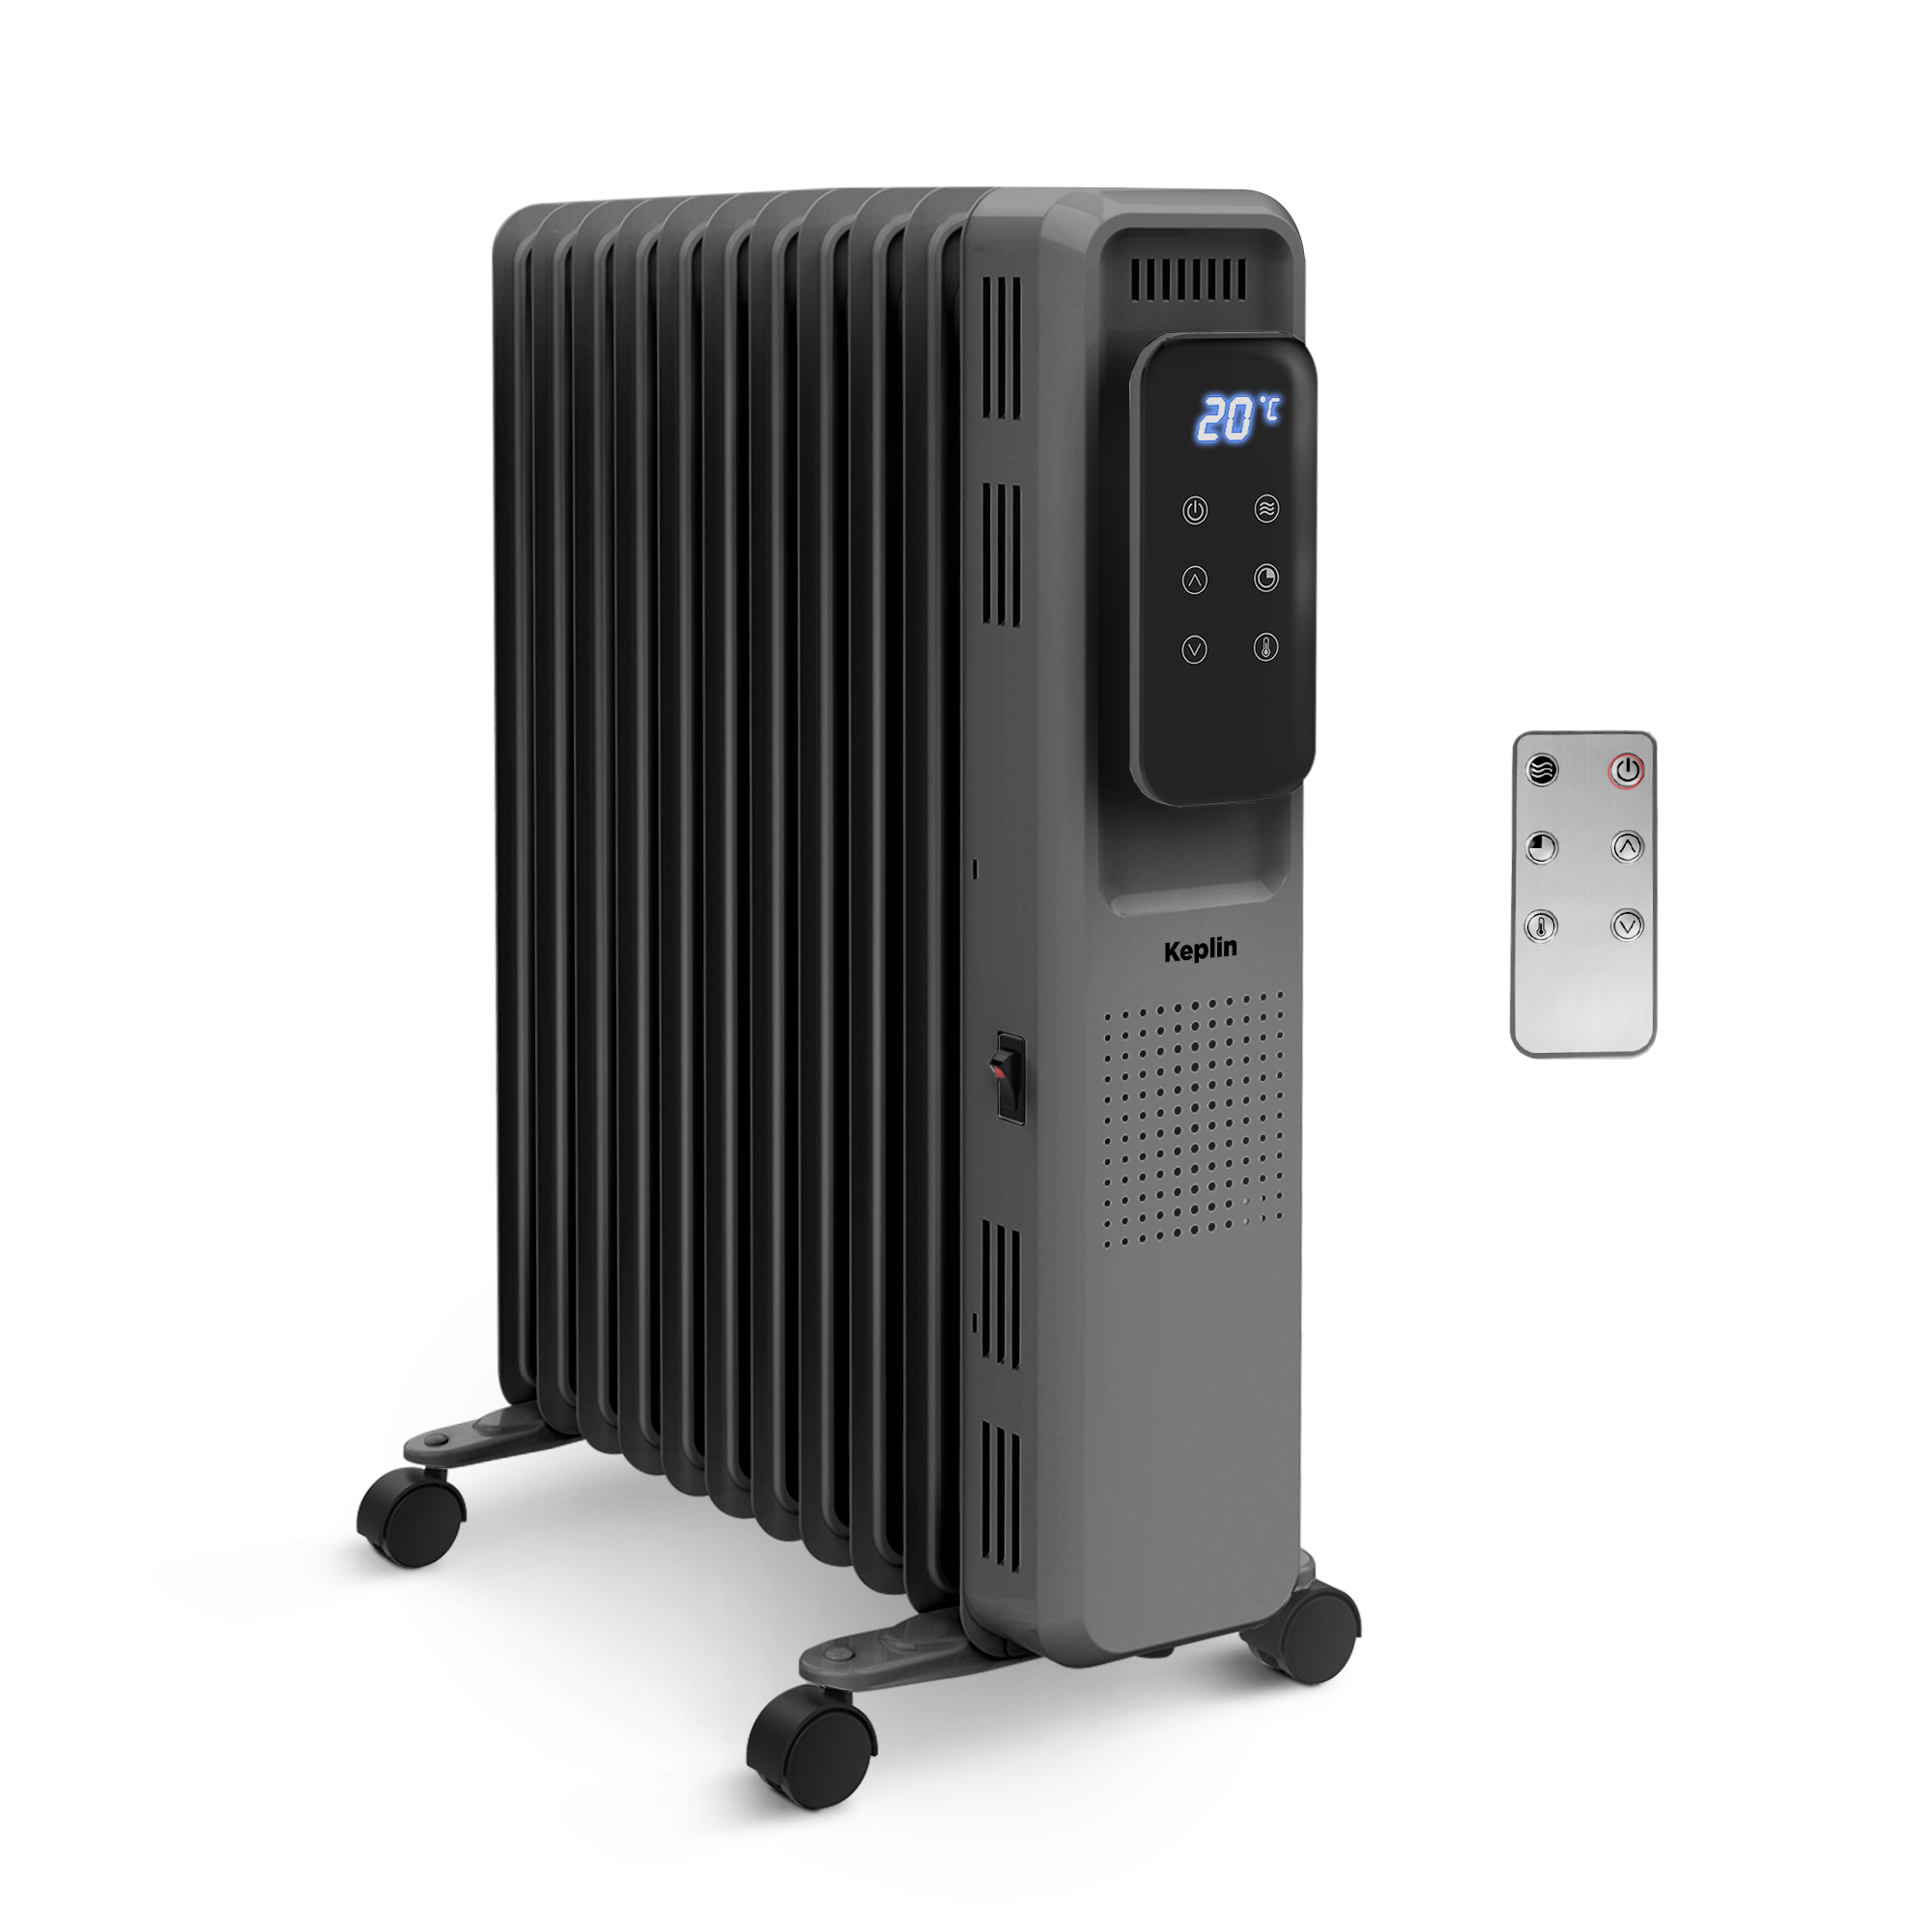 2500W Oil Filled Radiator With Digital Display - Efficient & Portable Electric Heater with Remote